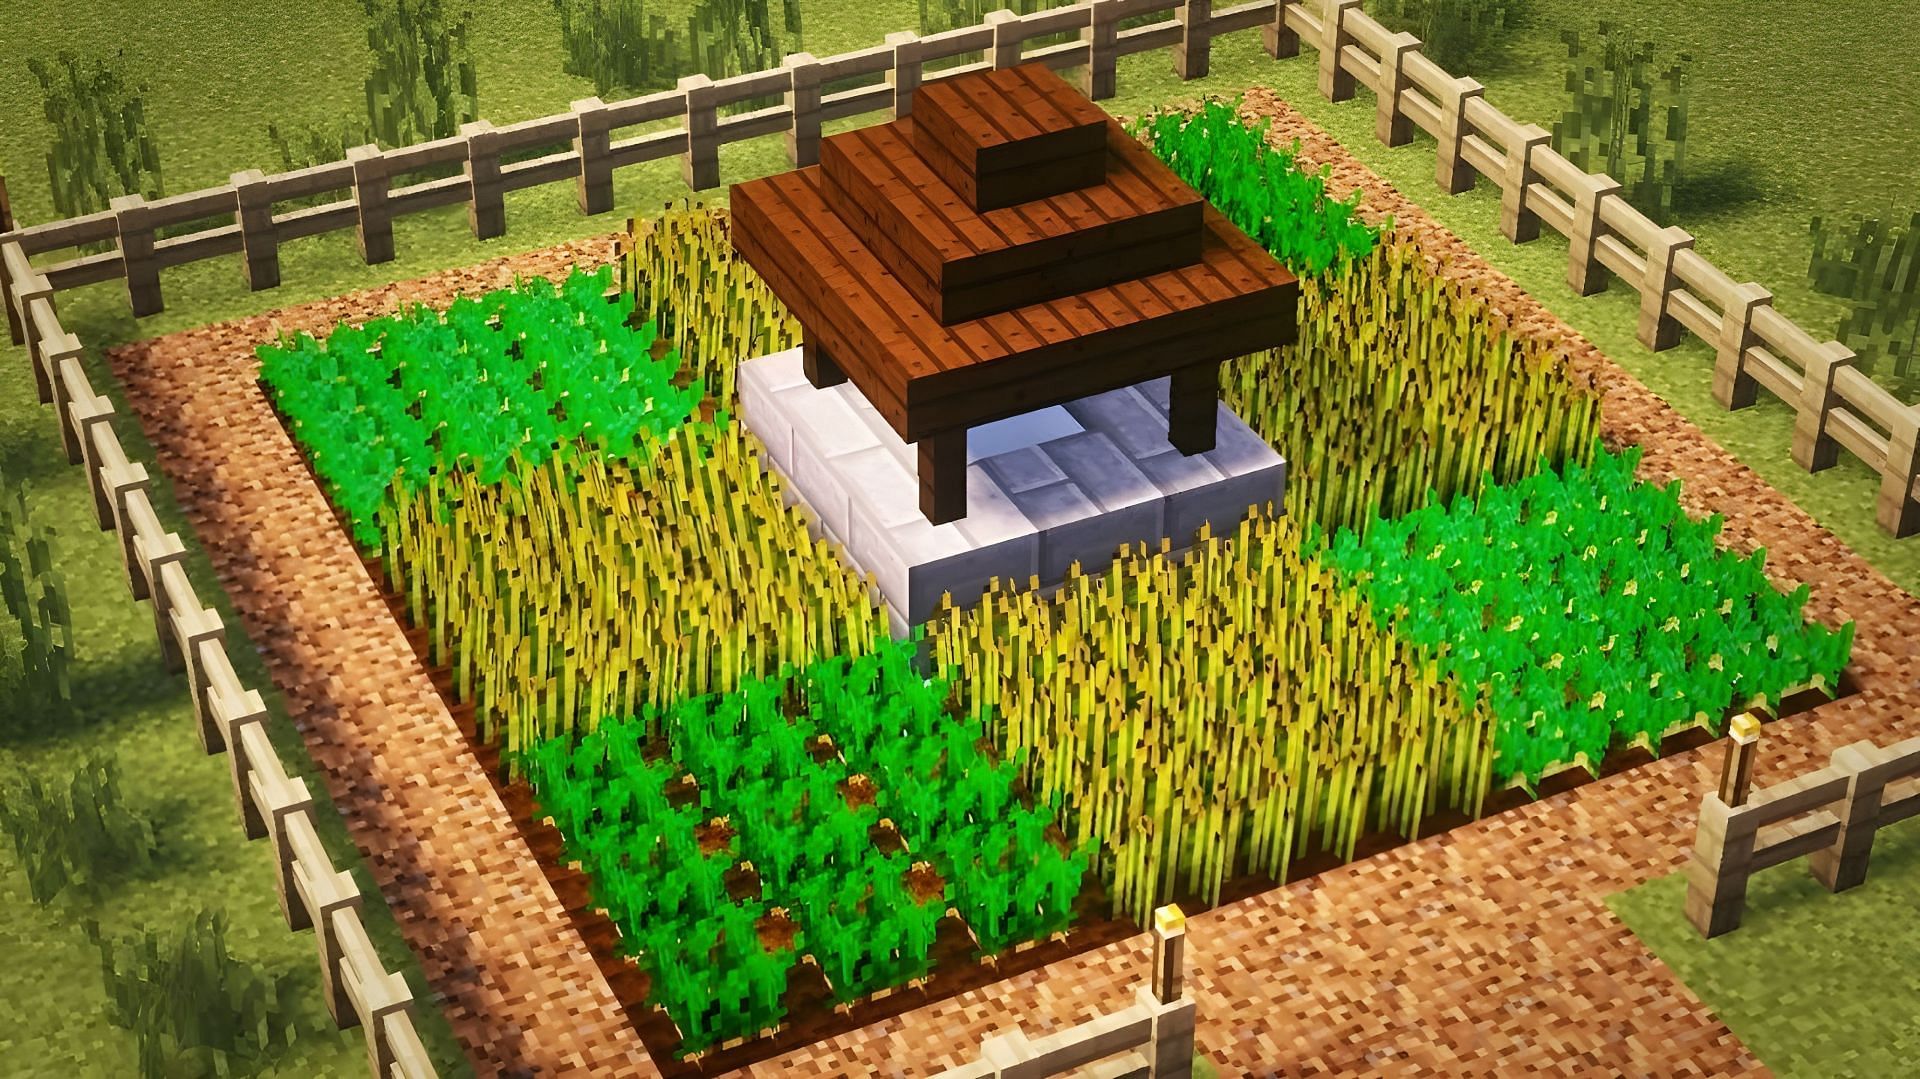 Minecraft gardens are necessary for those who want to grow food (Image via Youtube/Pallangor)